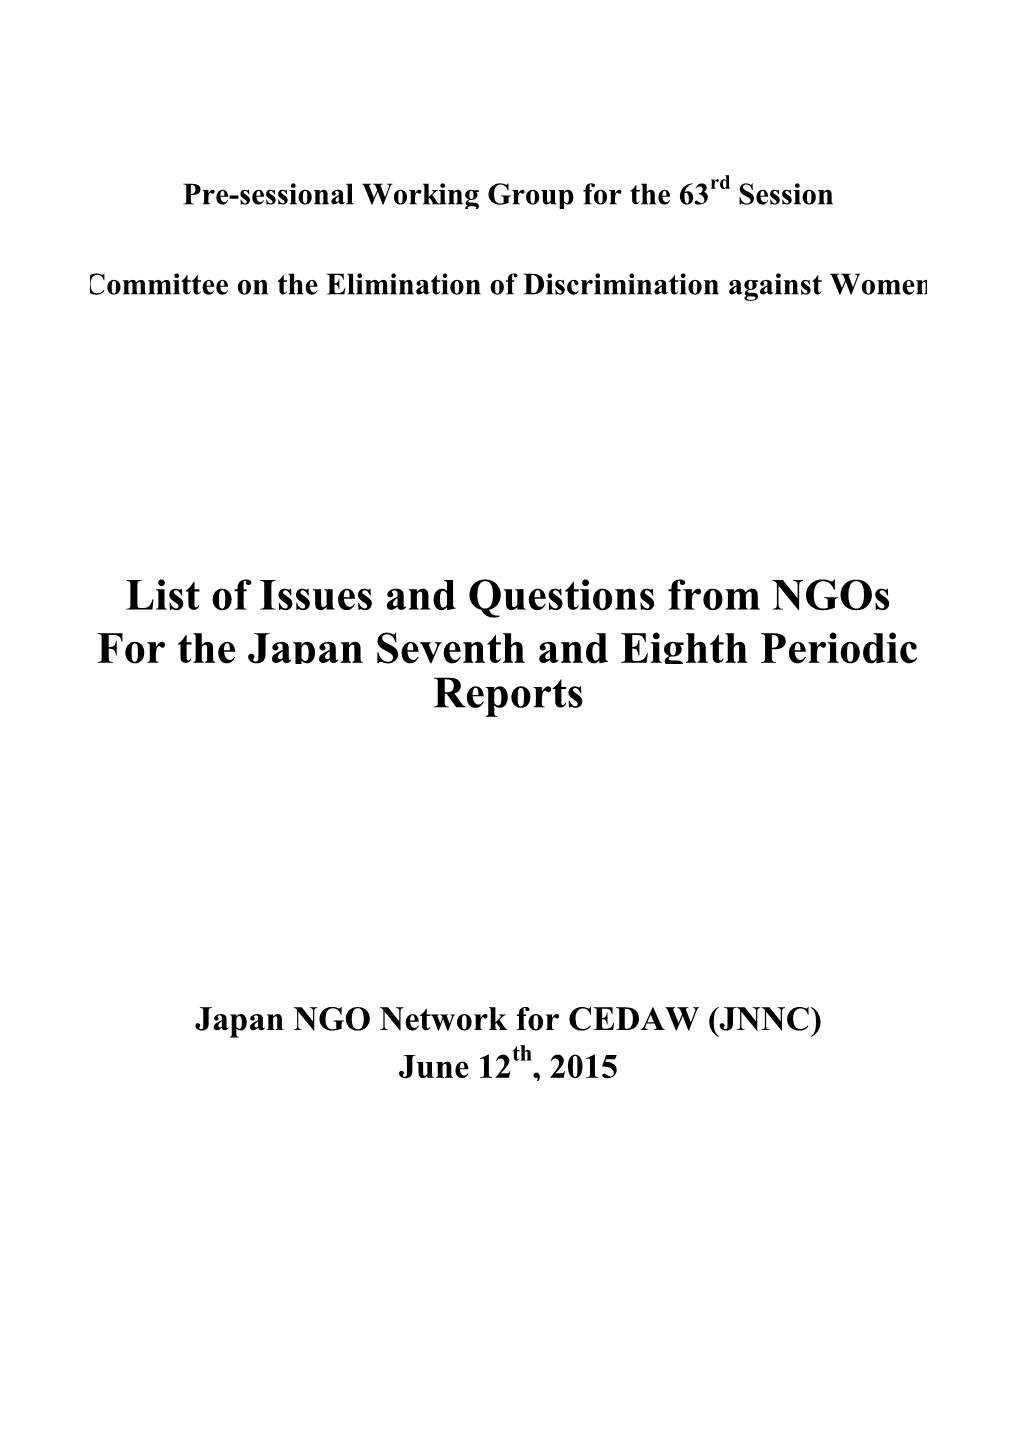 List of Issues and Questions from Ngos for the Japan Seventh and Eighth Periodic Reports